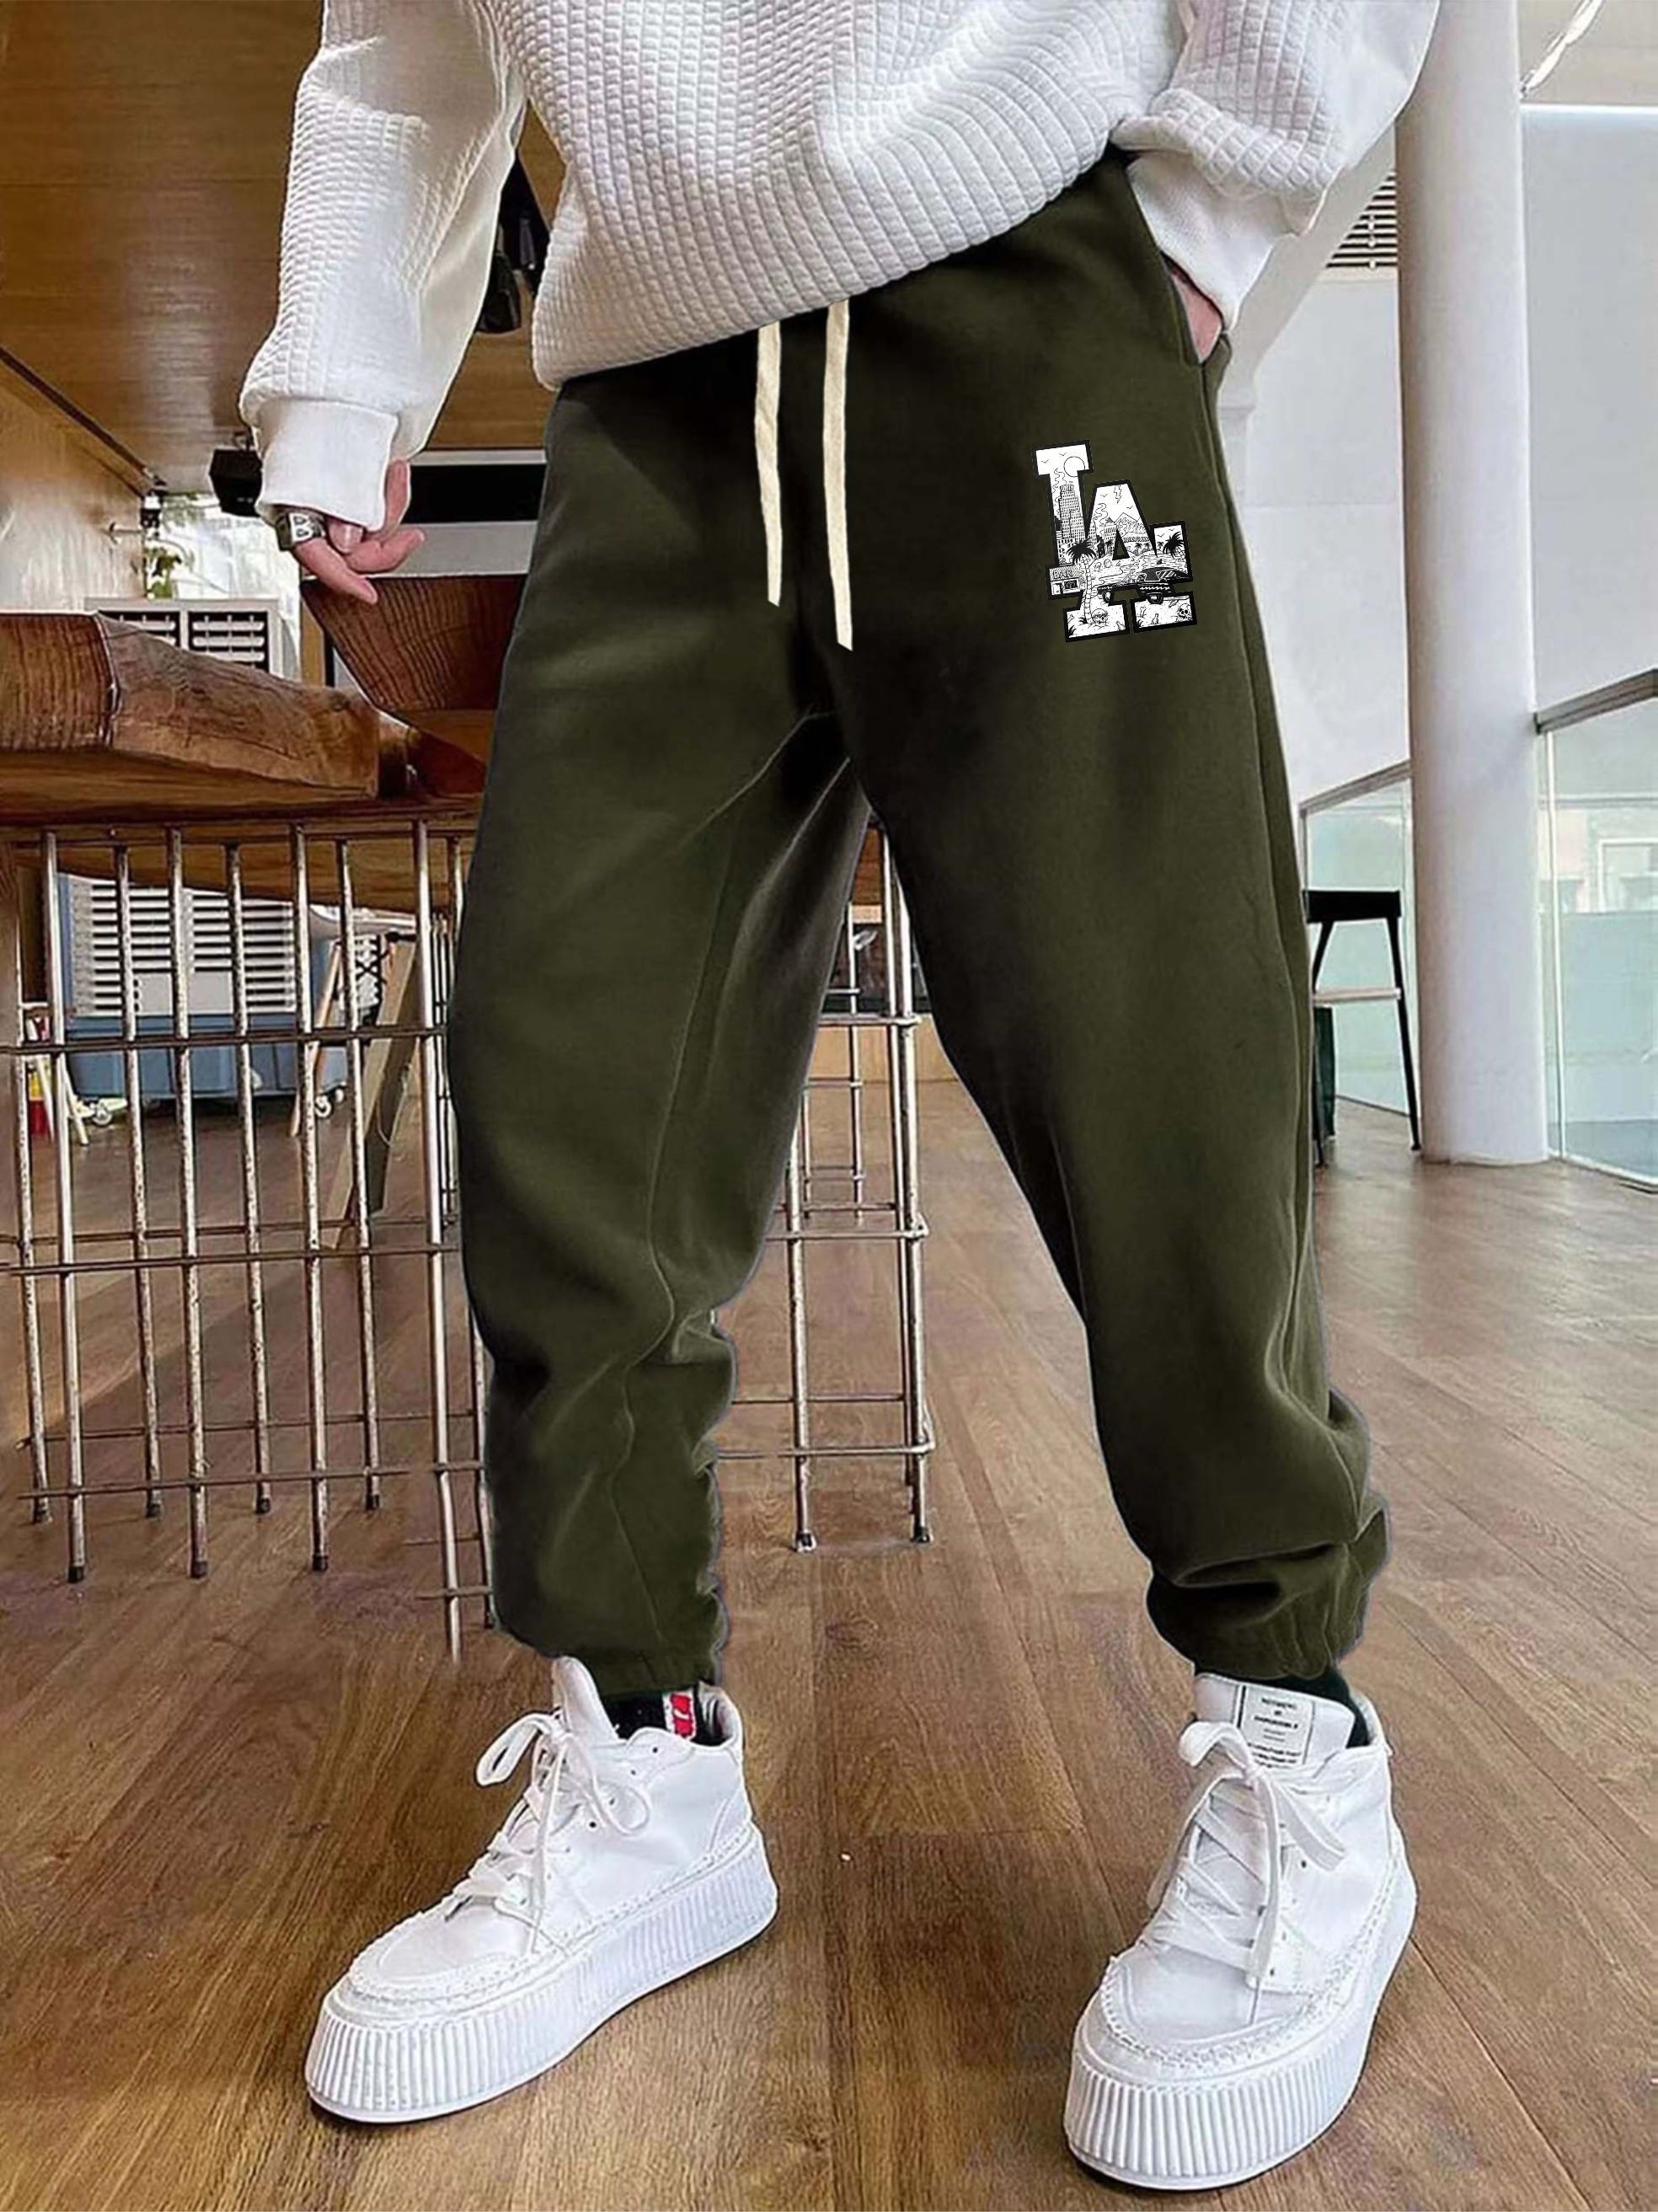 21 Best Chino jogger ideas  mens outfits, men casual, mens casual